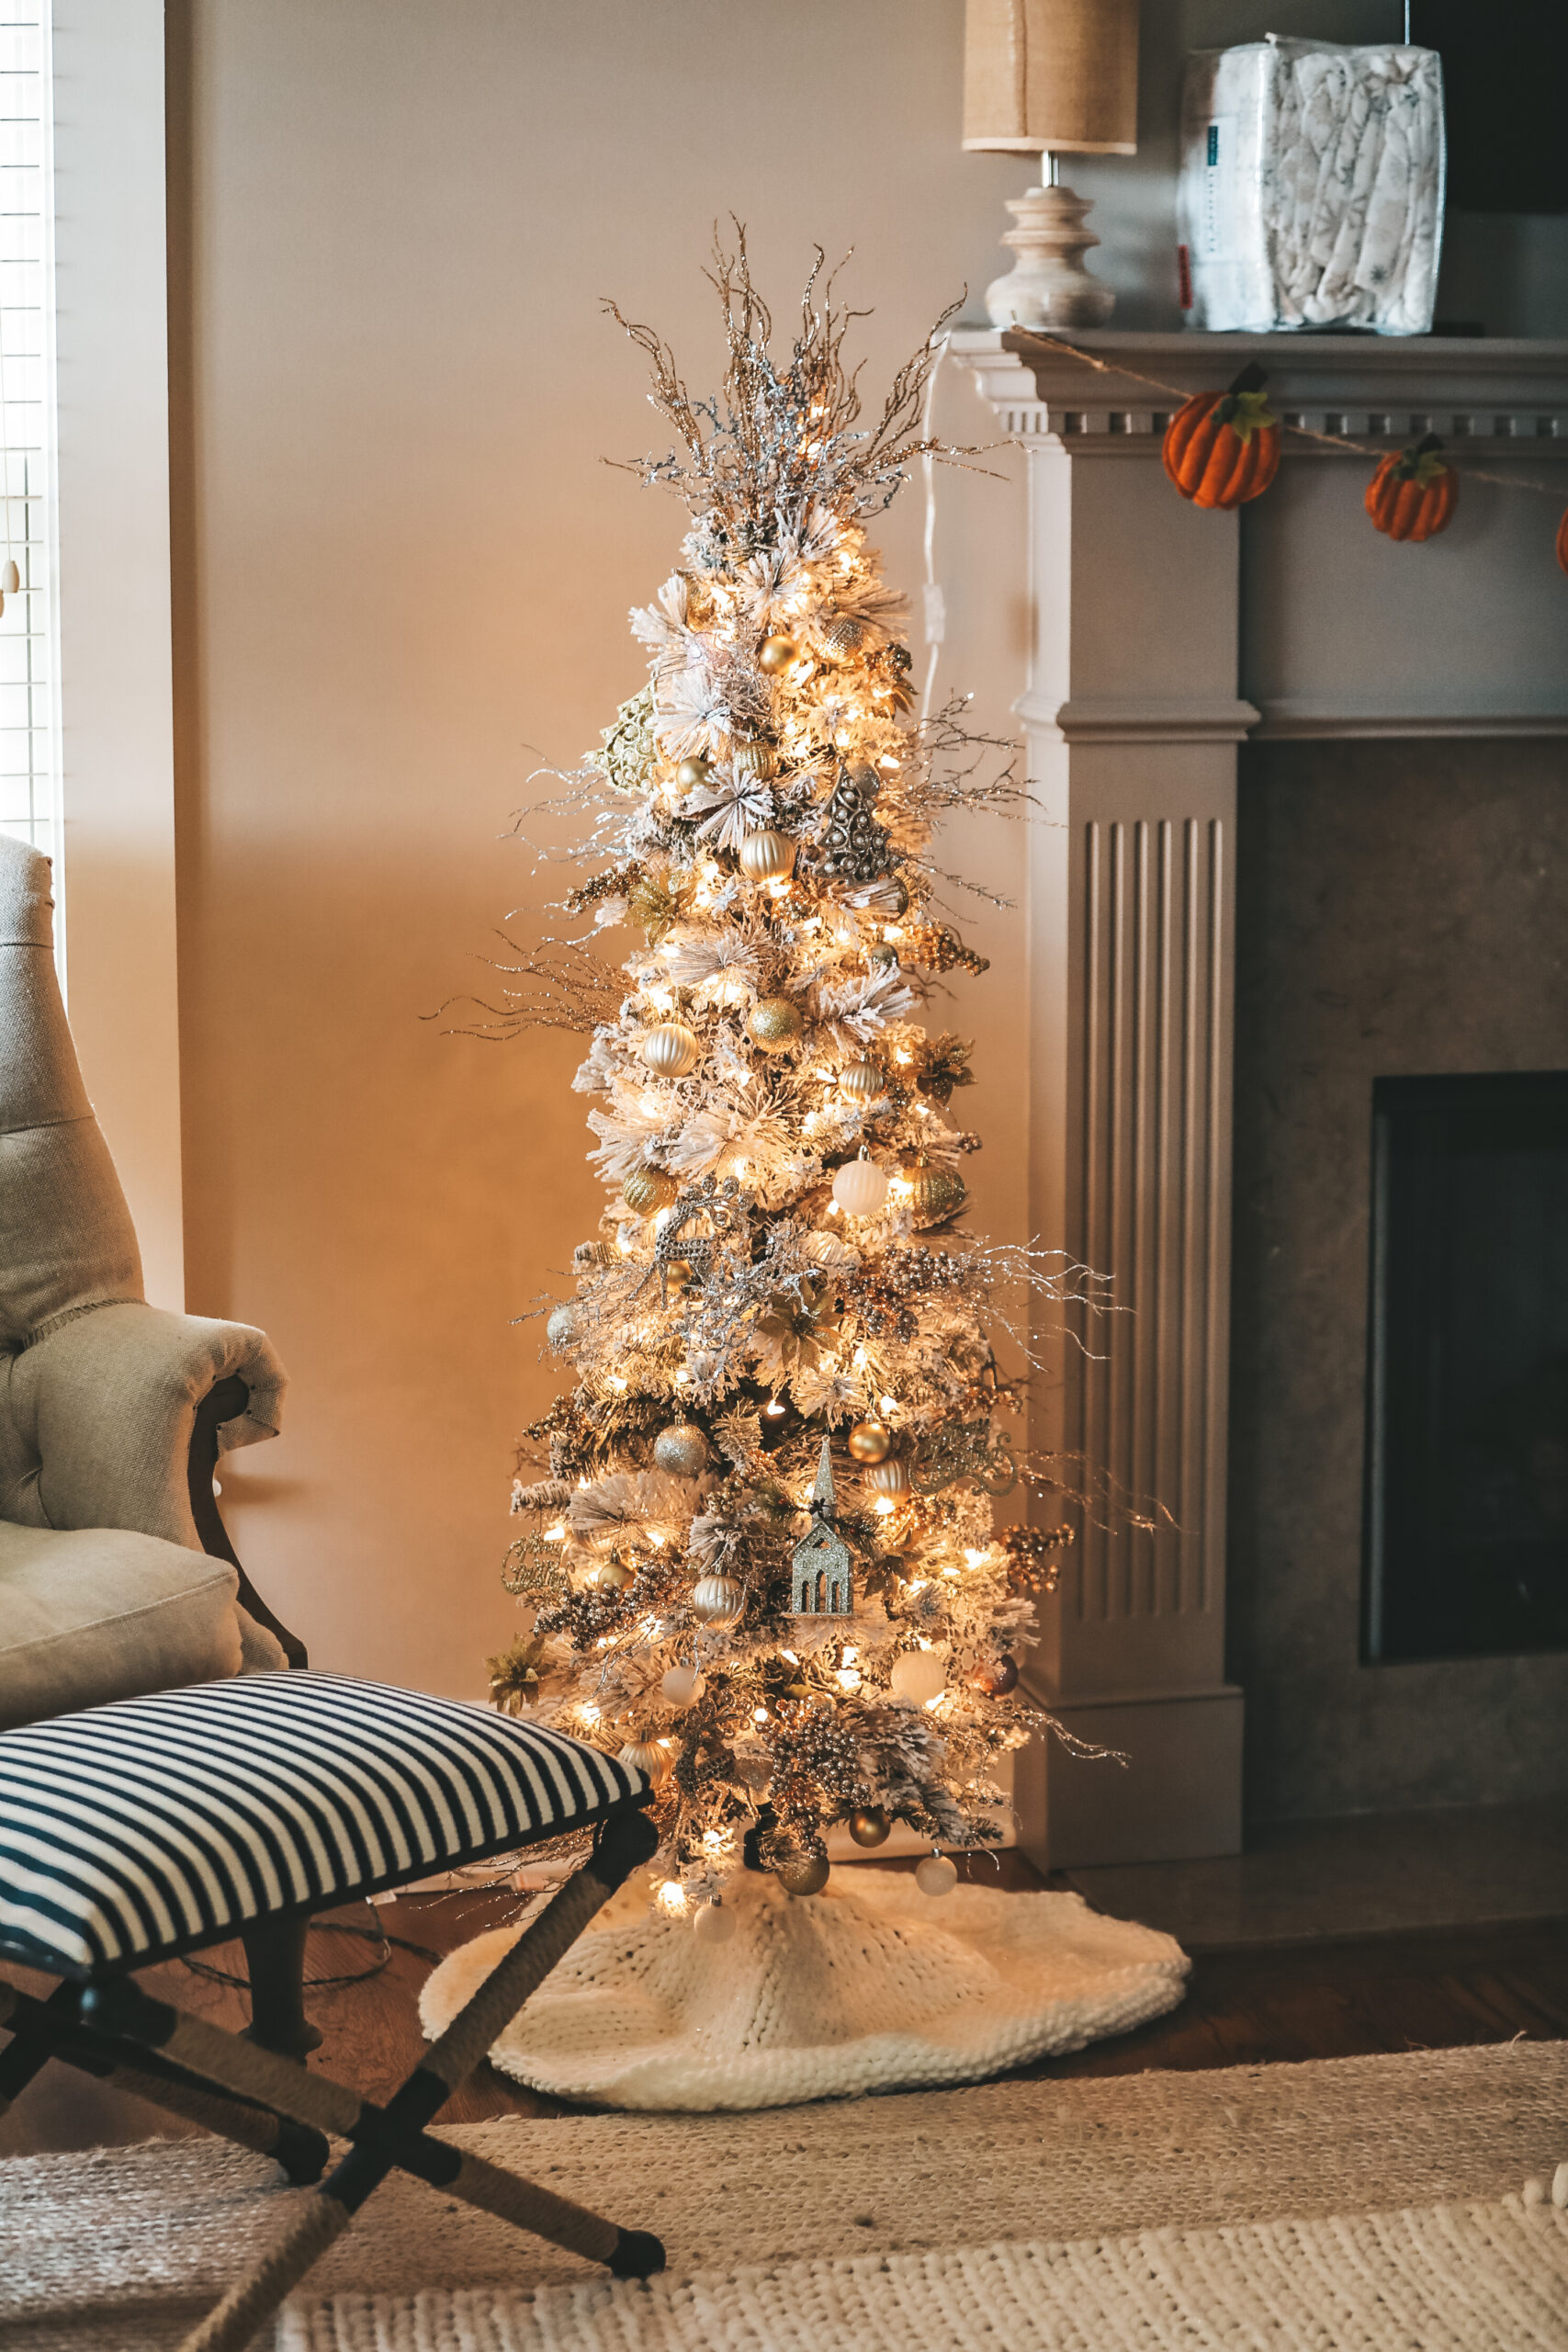 Decorating for Christmas with ONLY Dollar Tree Items - Hello Gorgeous, by  Angela Lanter